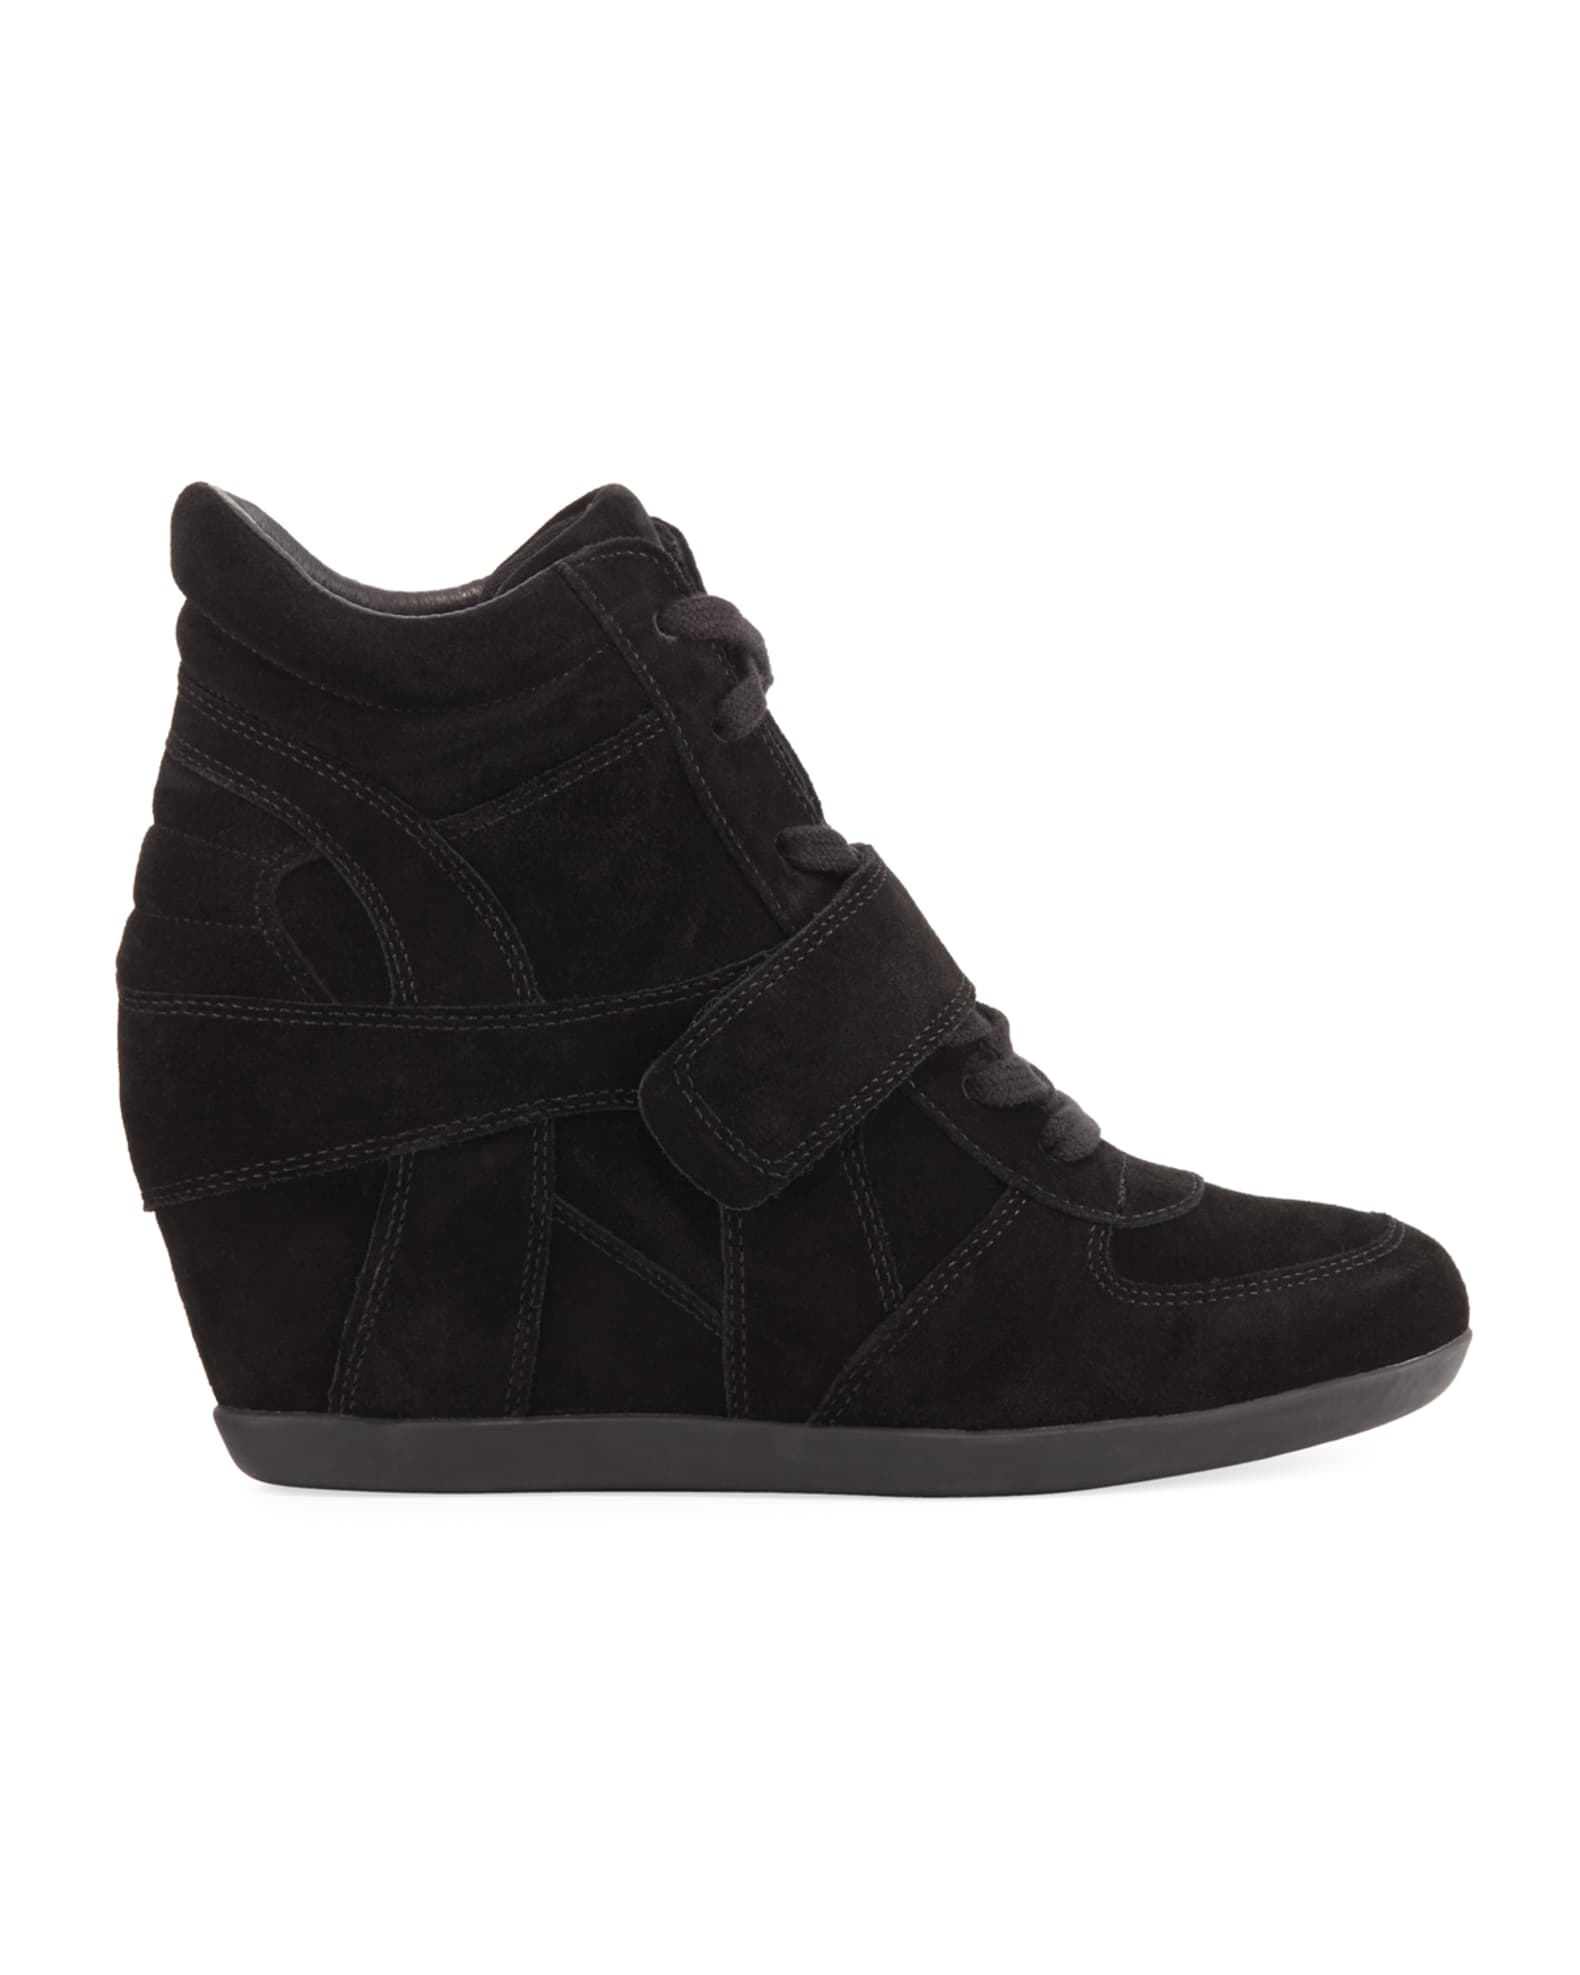 Ash Bowie Lace-Up Suede Sneaker Booties | Neiman Marcus